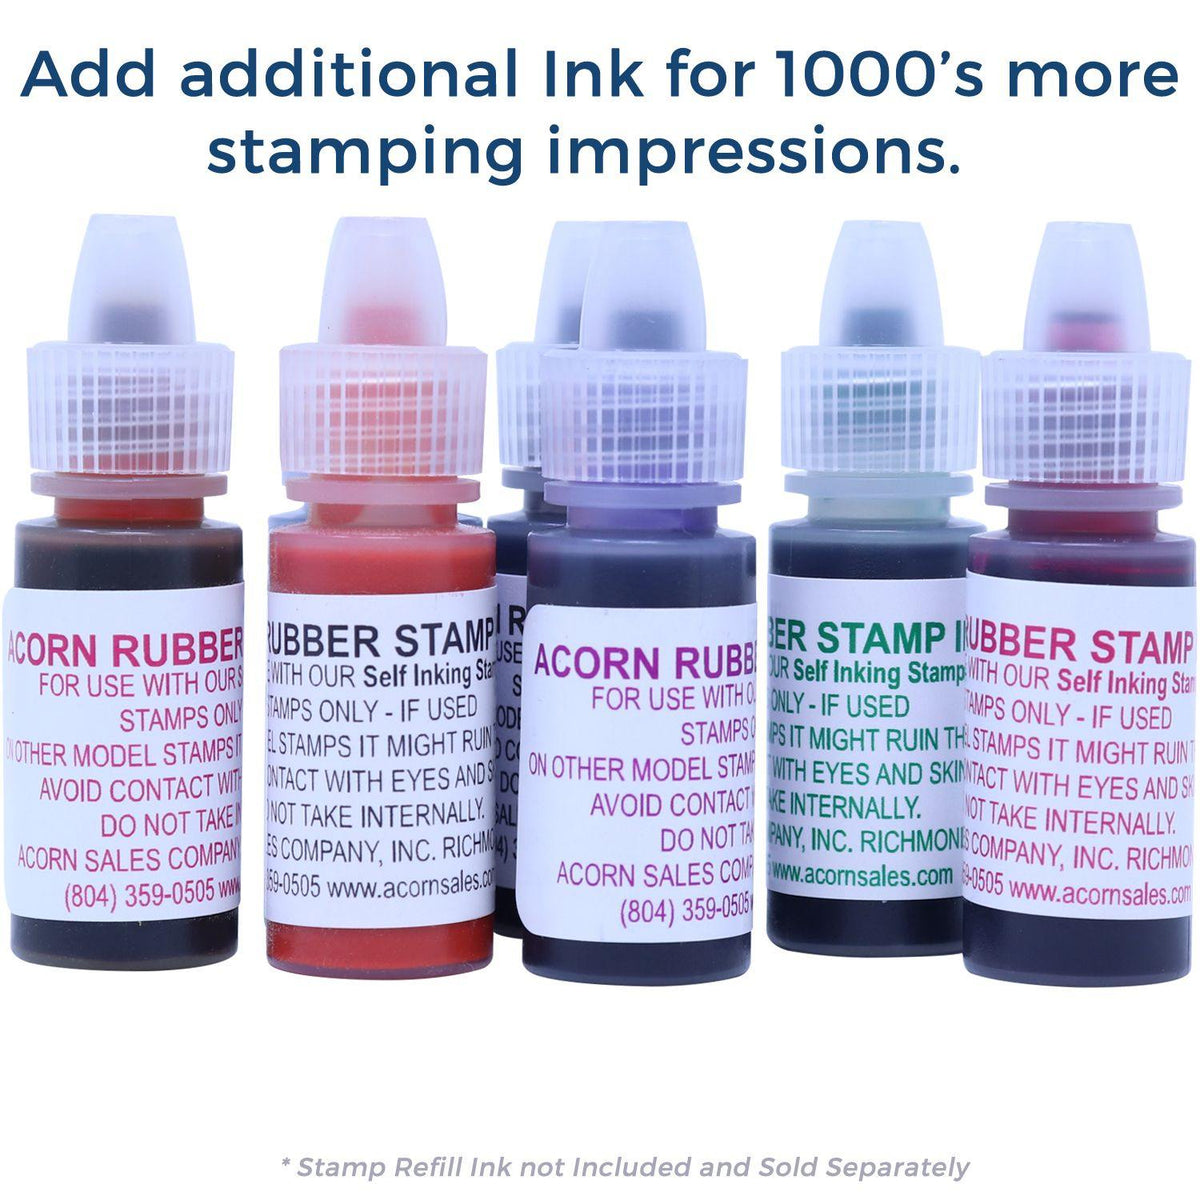 Refill Inks for Slim Pre-Inked Economy Mail Stamp Available